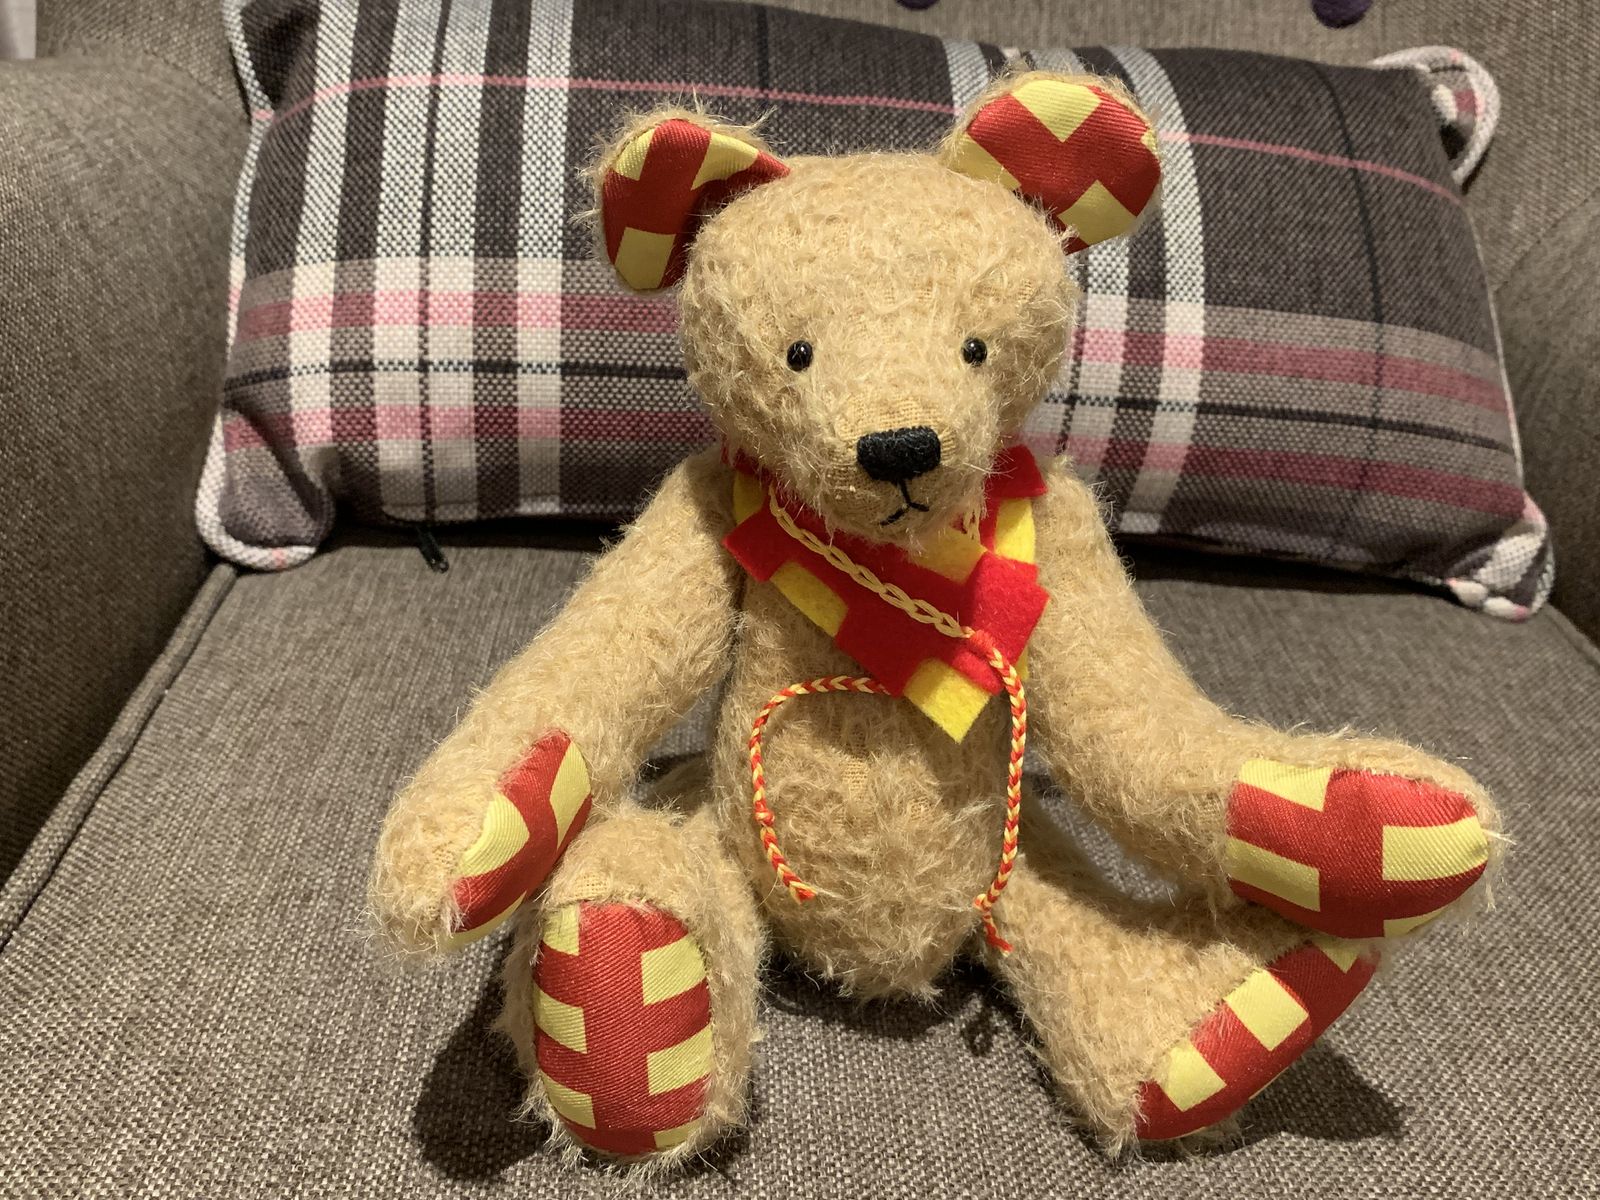 Northumbear - official mascot of Northumberland Day